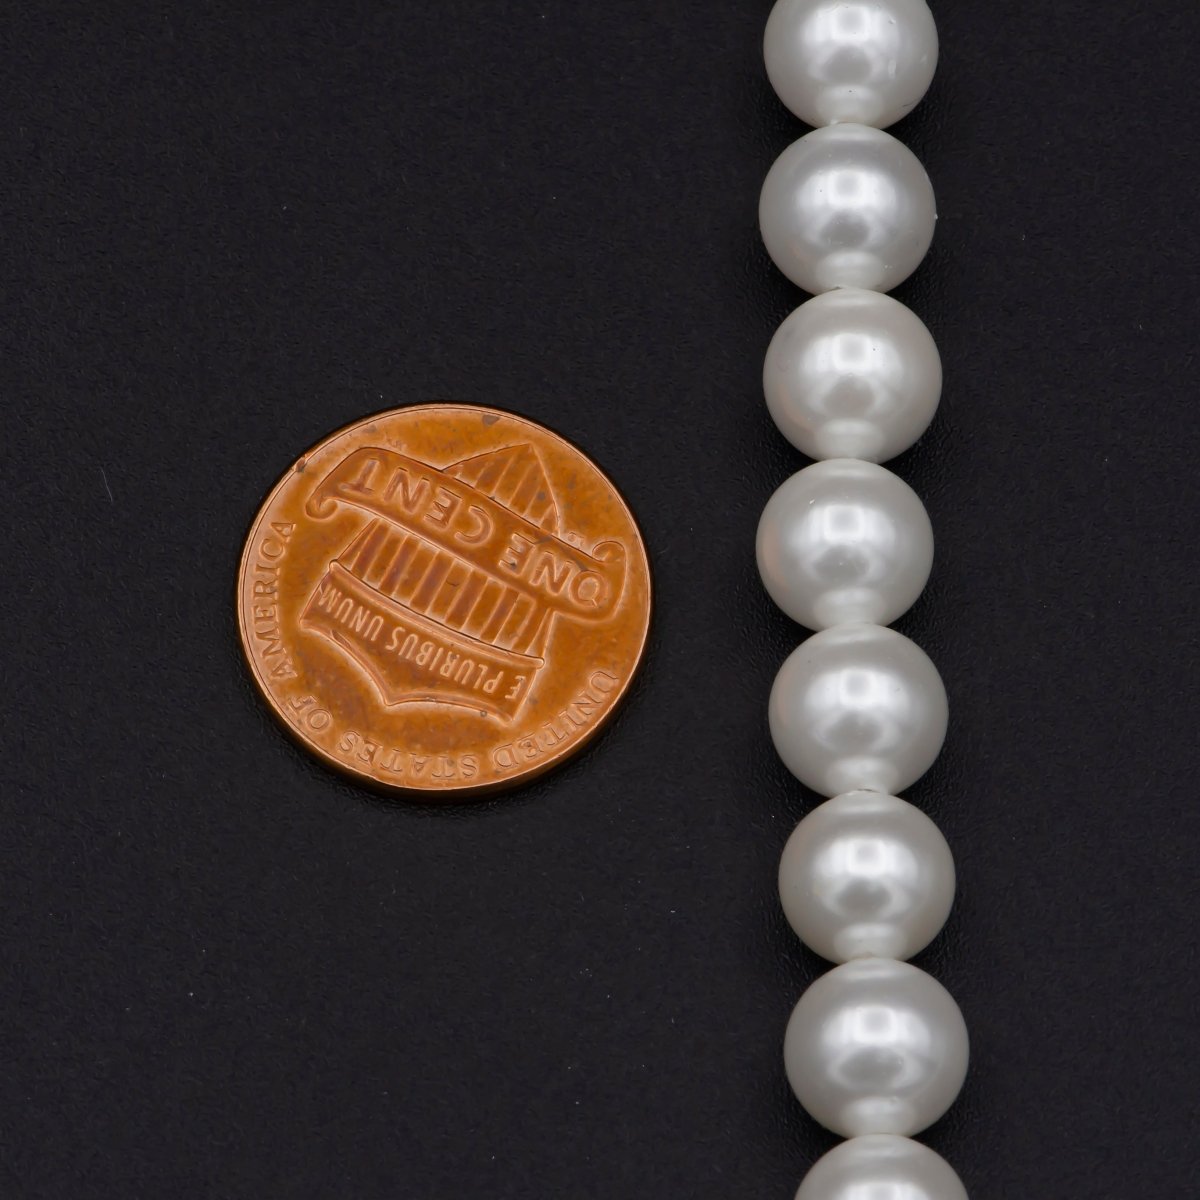 7.9-8.2mm AAA Natural White Semi Round Freshwater Pearls Genuine High Luster Smooth And Round White Freshwater Pearl Beads | WA-575 Clearance Pricing - DLUXCA